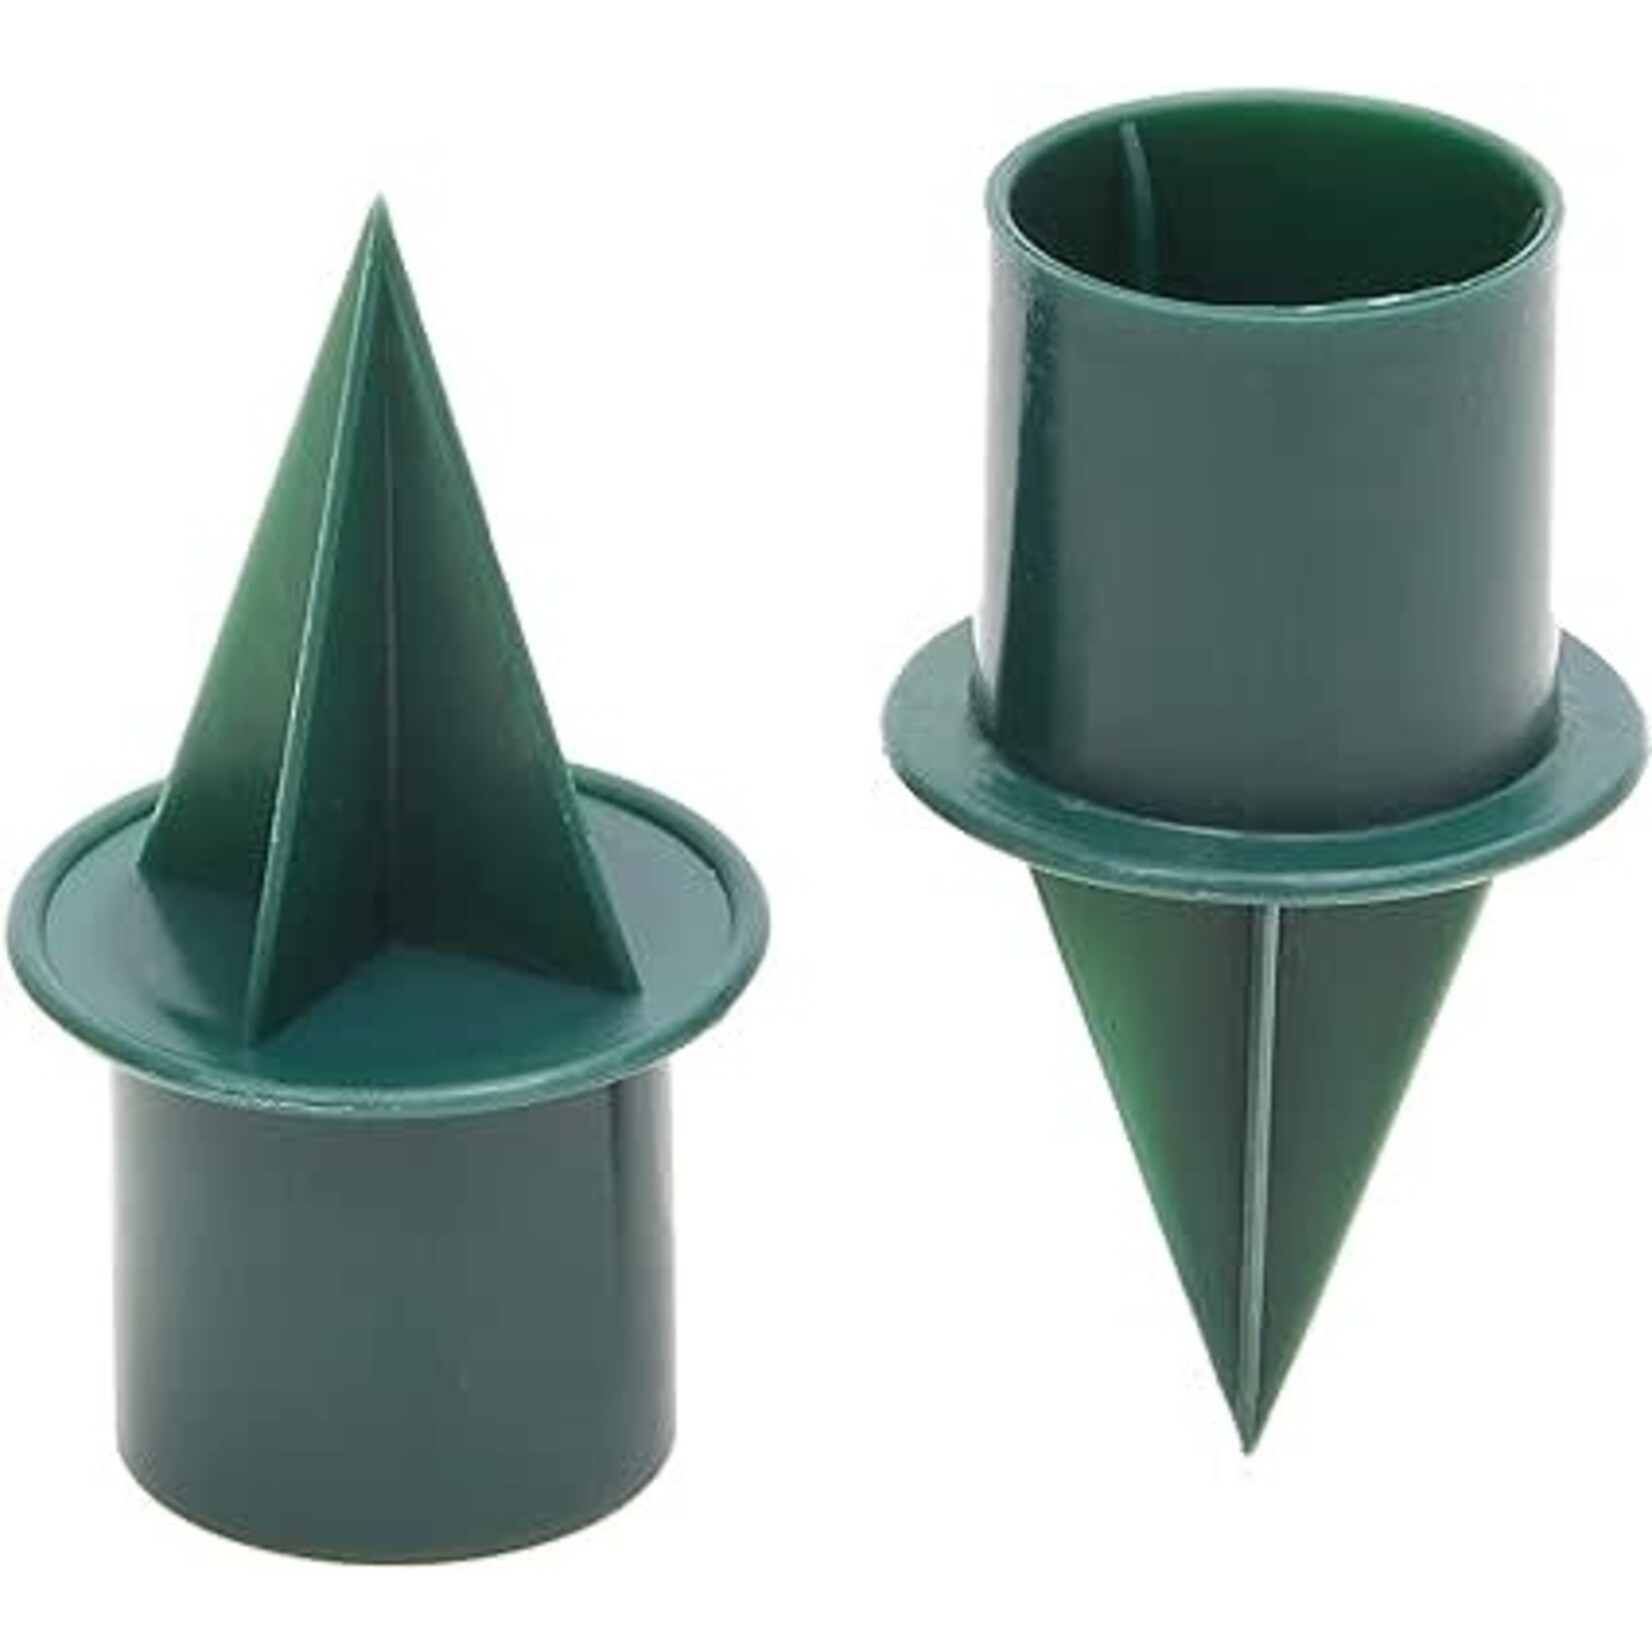 Four Pack Candle Holders for Advent Wreath